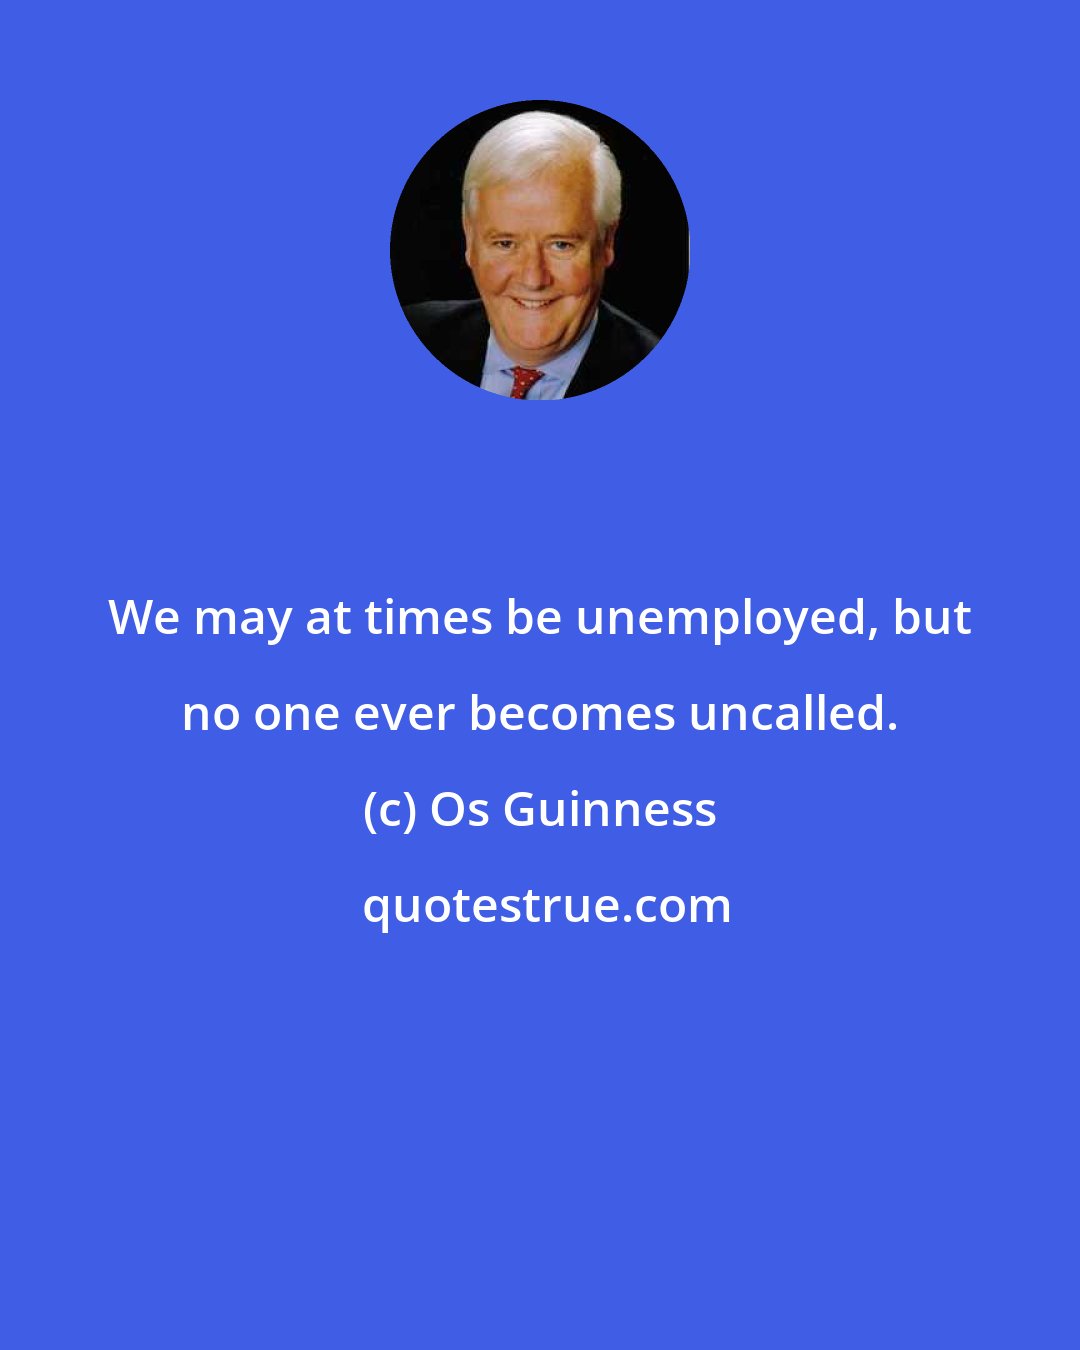 Os Guinness: We may at times be unemployed, but no one ever becomes uncalled.